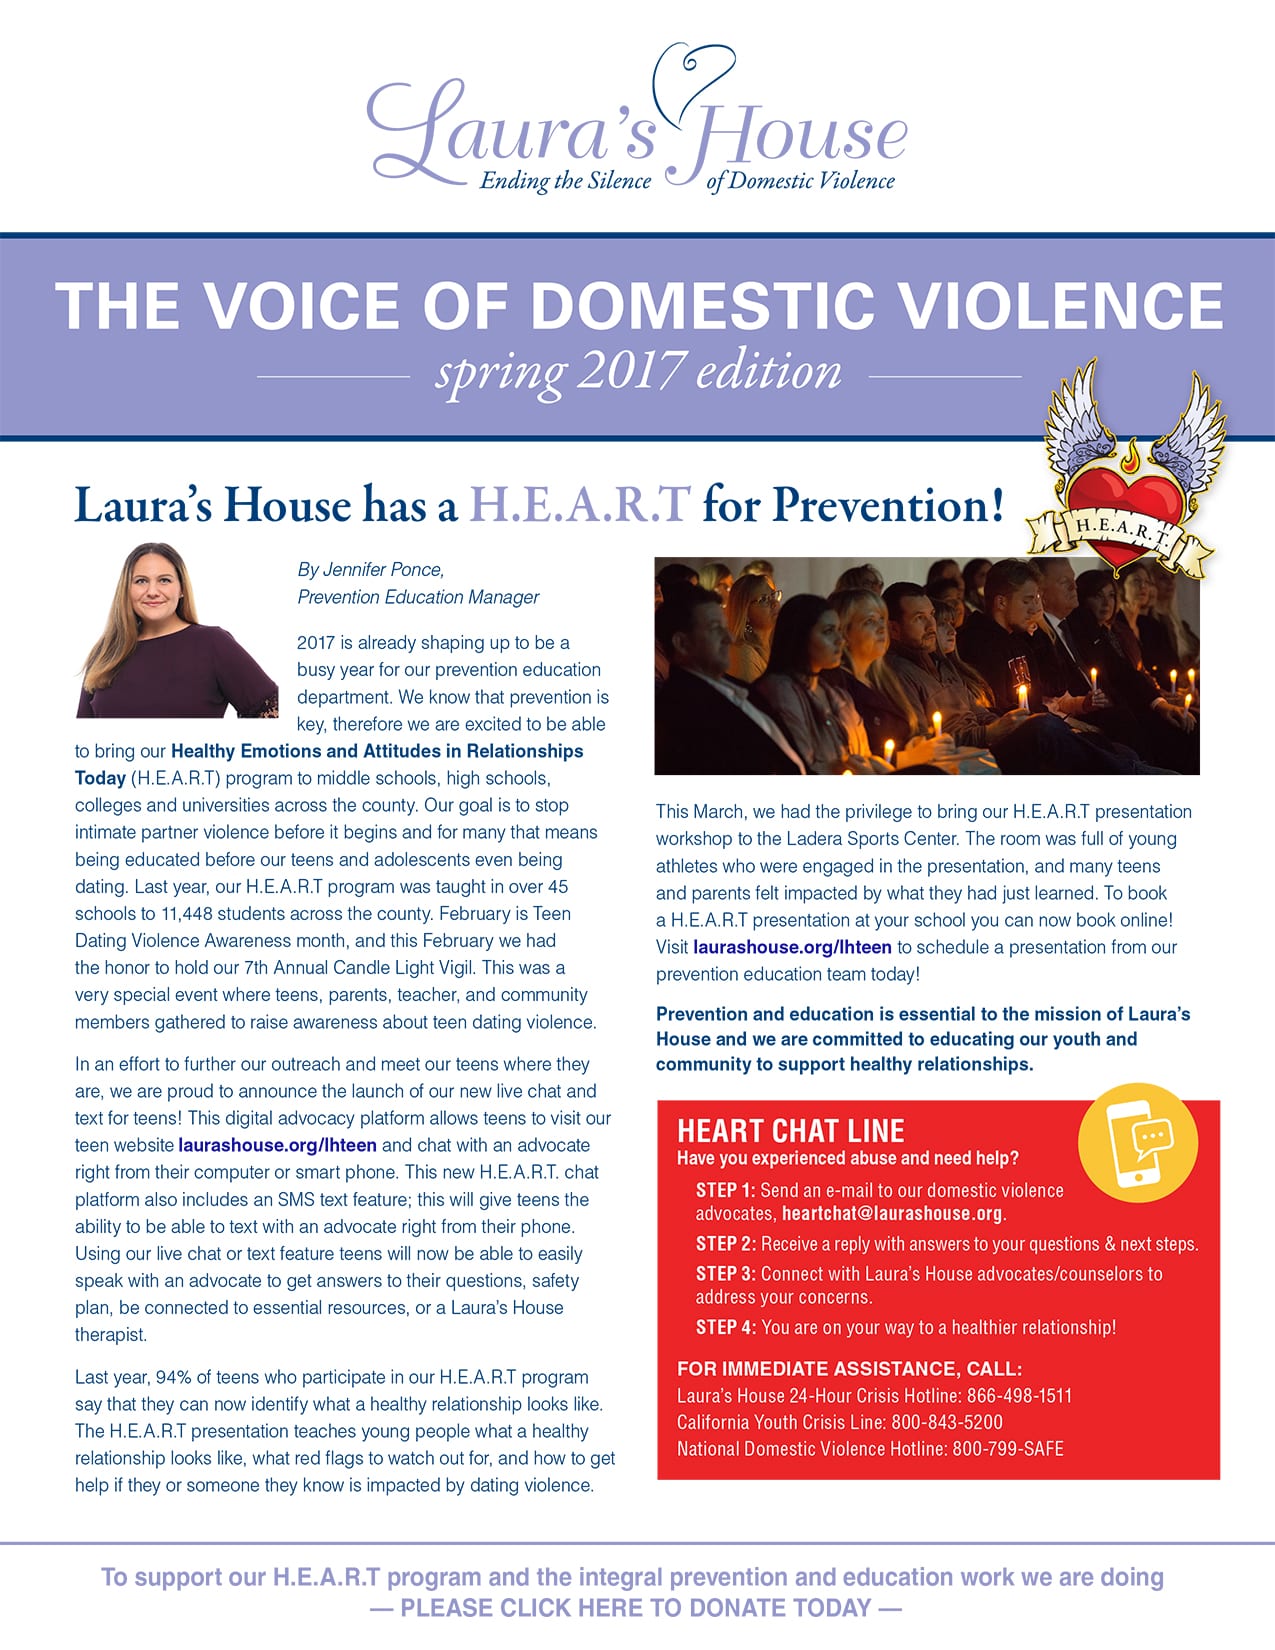 The Voice of Domestic Violence - Spring 2017 edition